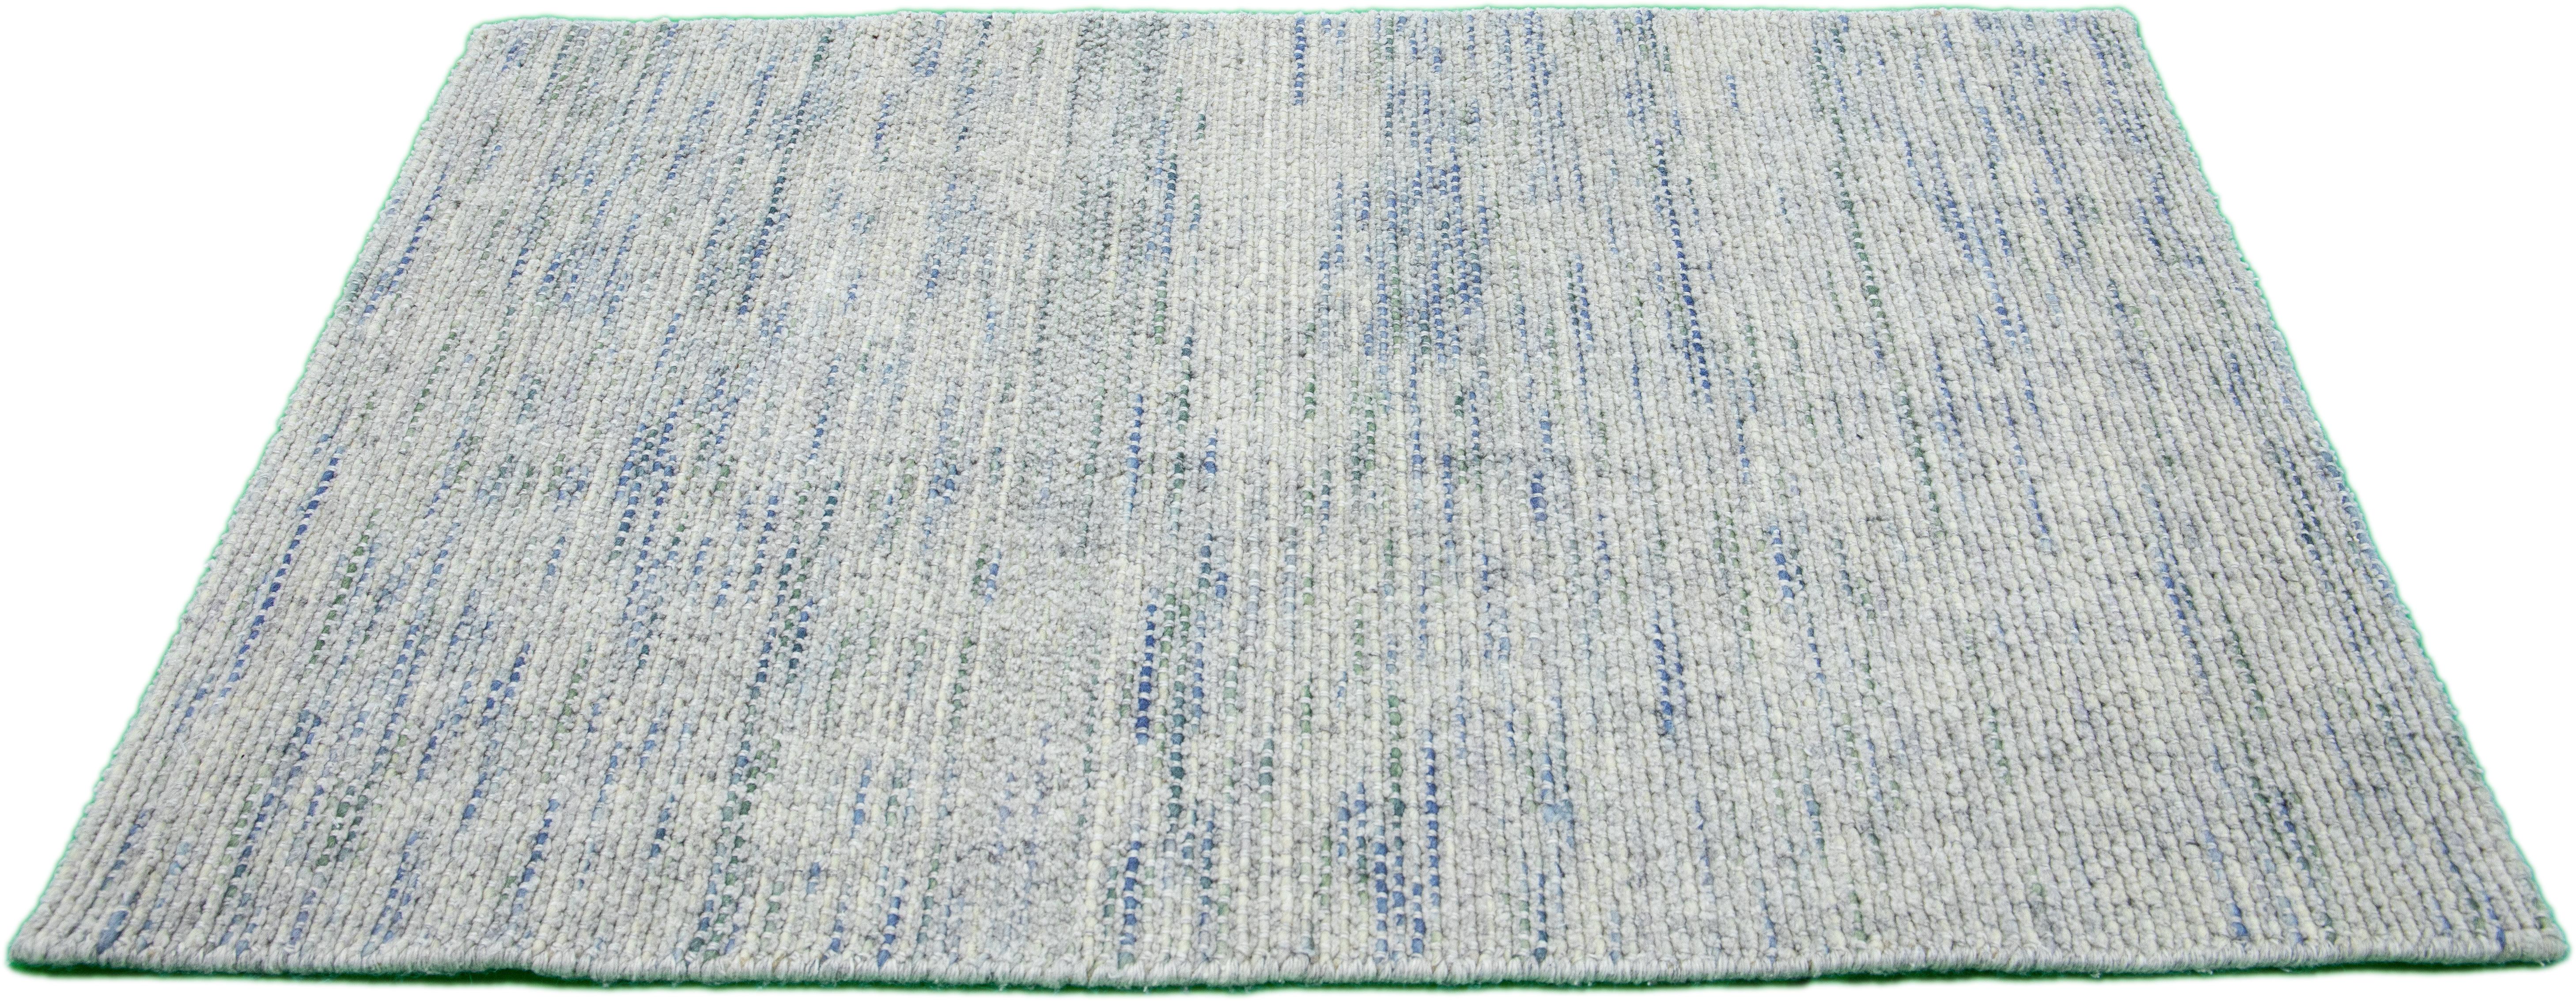 Apadana's Modern custom wool rug. Custom sizes and colors made-to-order. 

Material: Wool 
Techniques: Hand-Loom
Style: Modern
Lead time: Approx. 15-16 wks available 
Colors: As shown, other custom colors are available. 
Origen: India